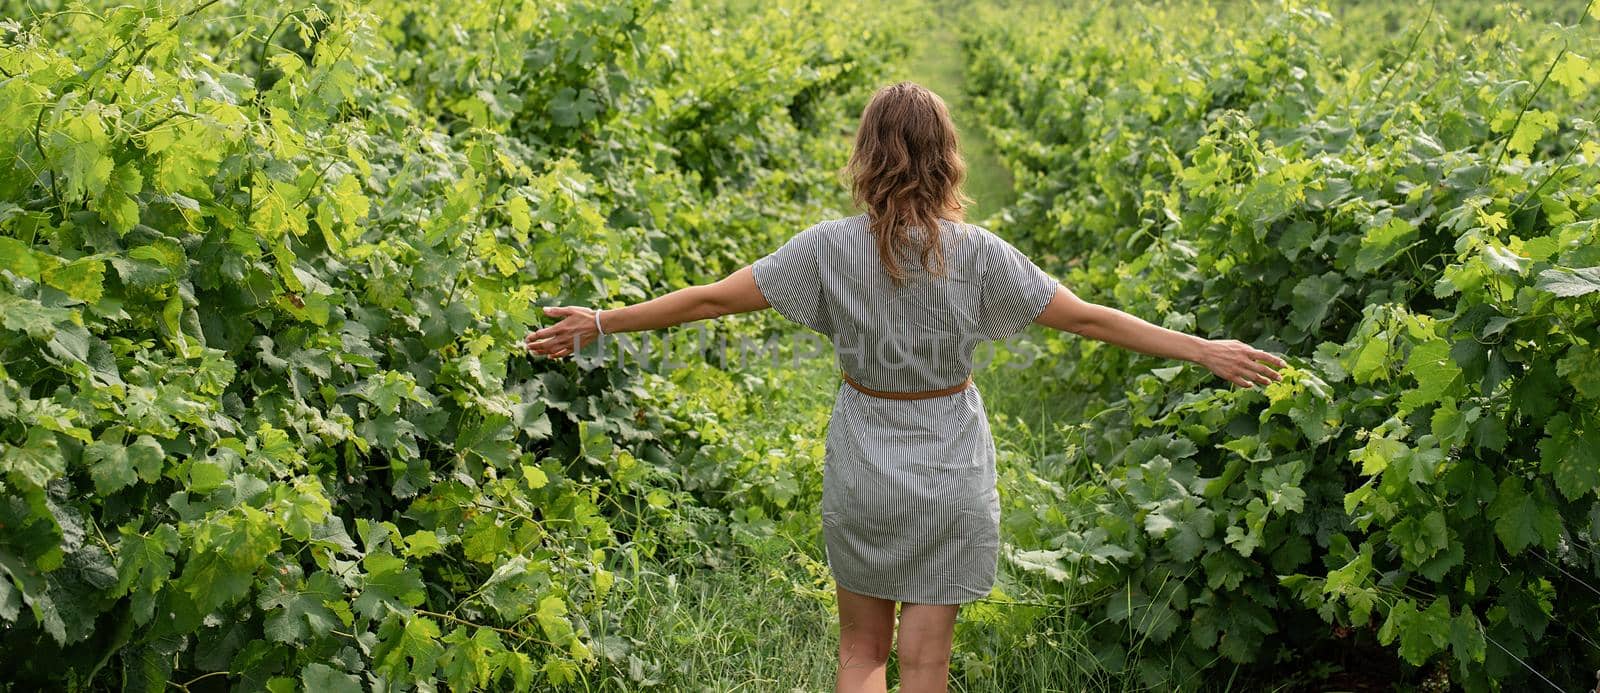 Back view of a woman in summer dress walking through the vineyard